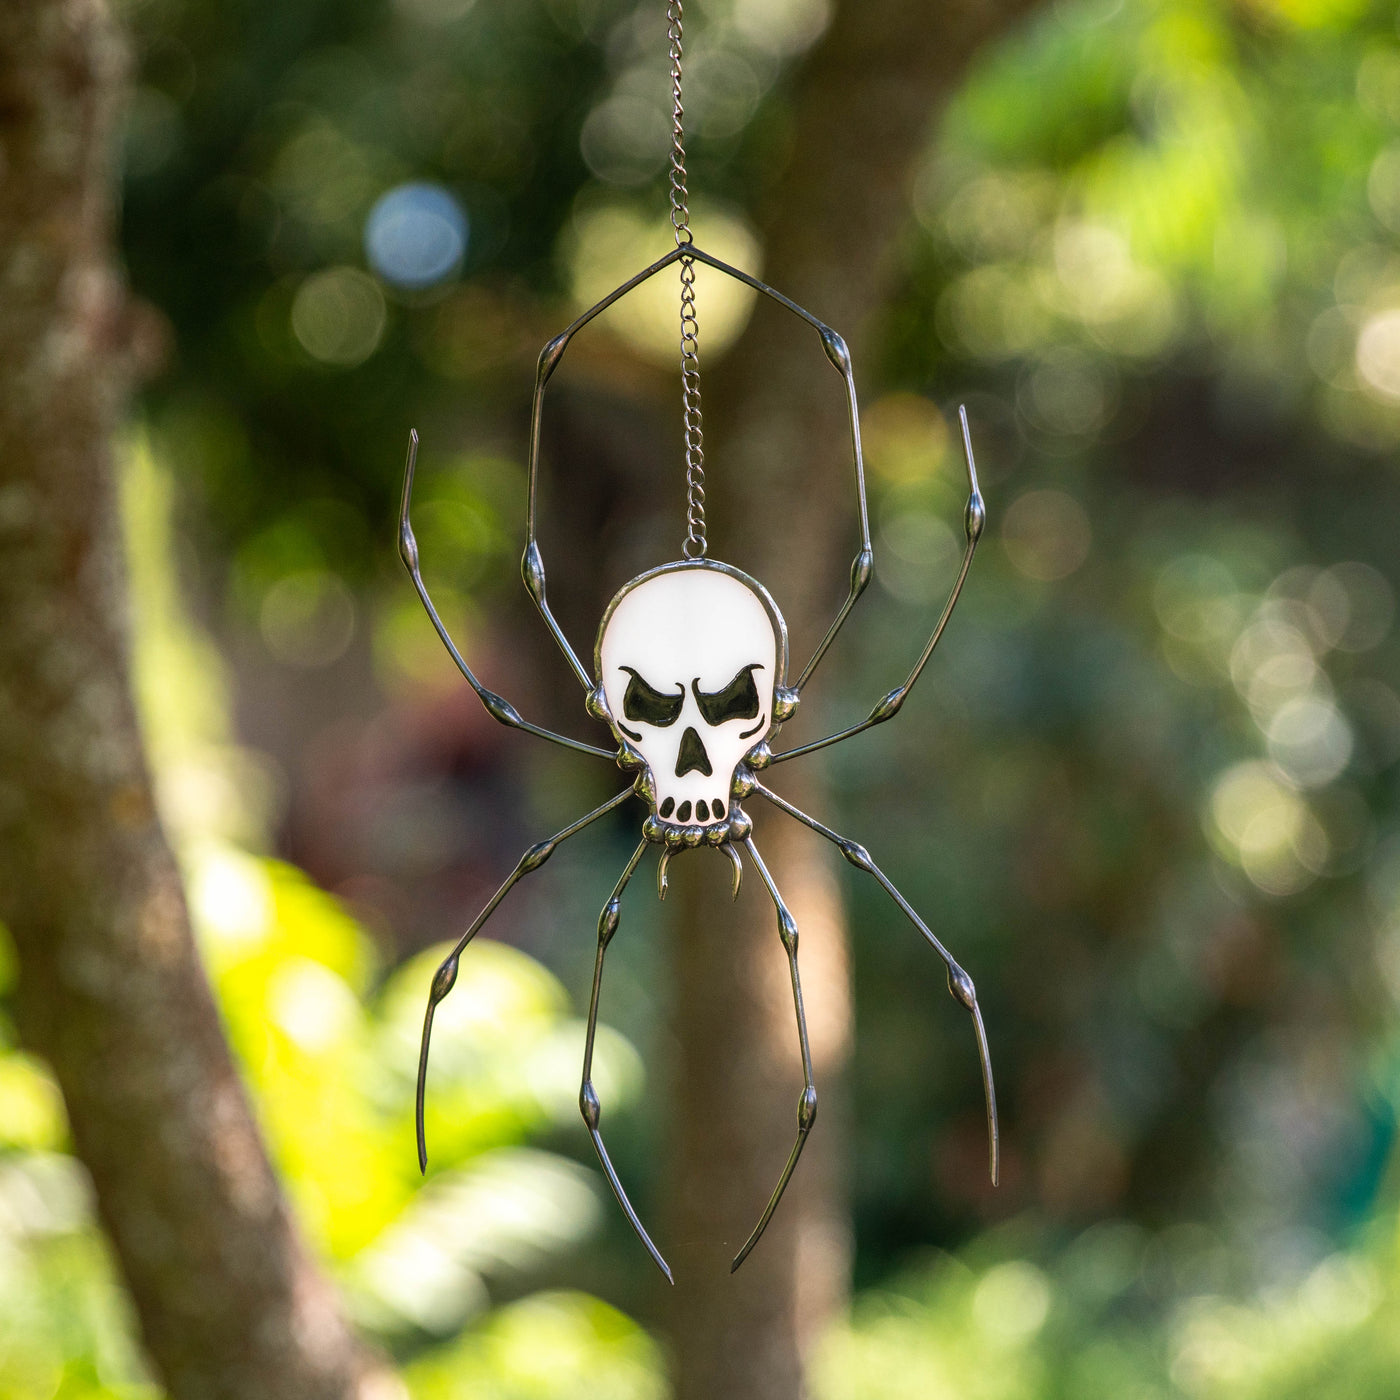 Creepy spider skeleton window hanging of stained glass